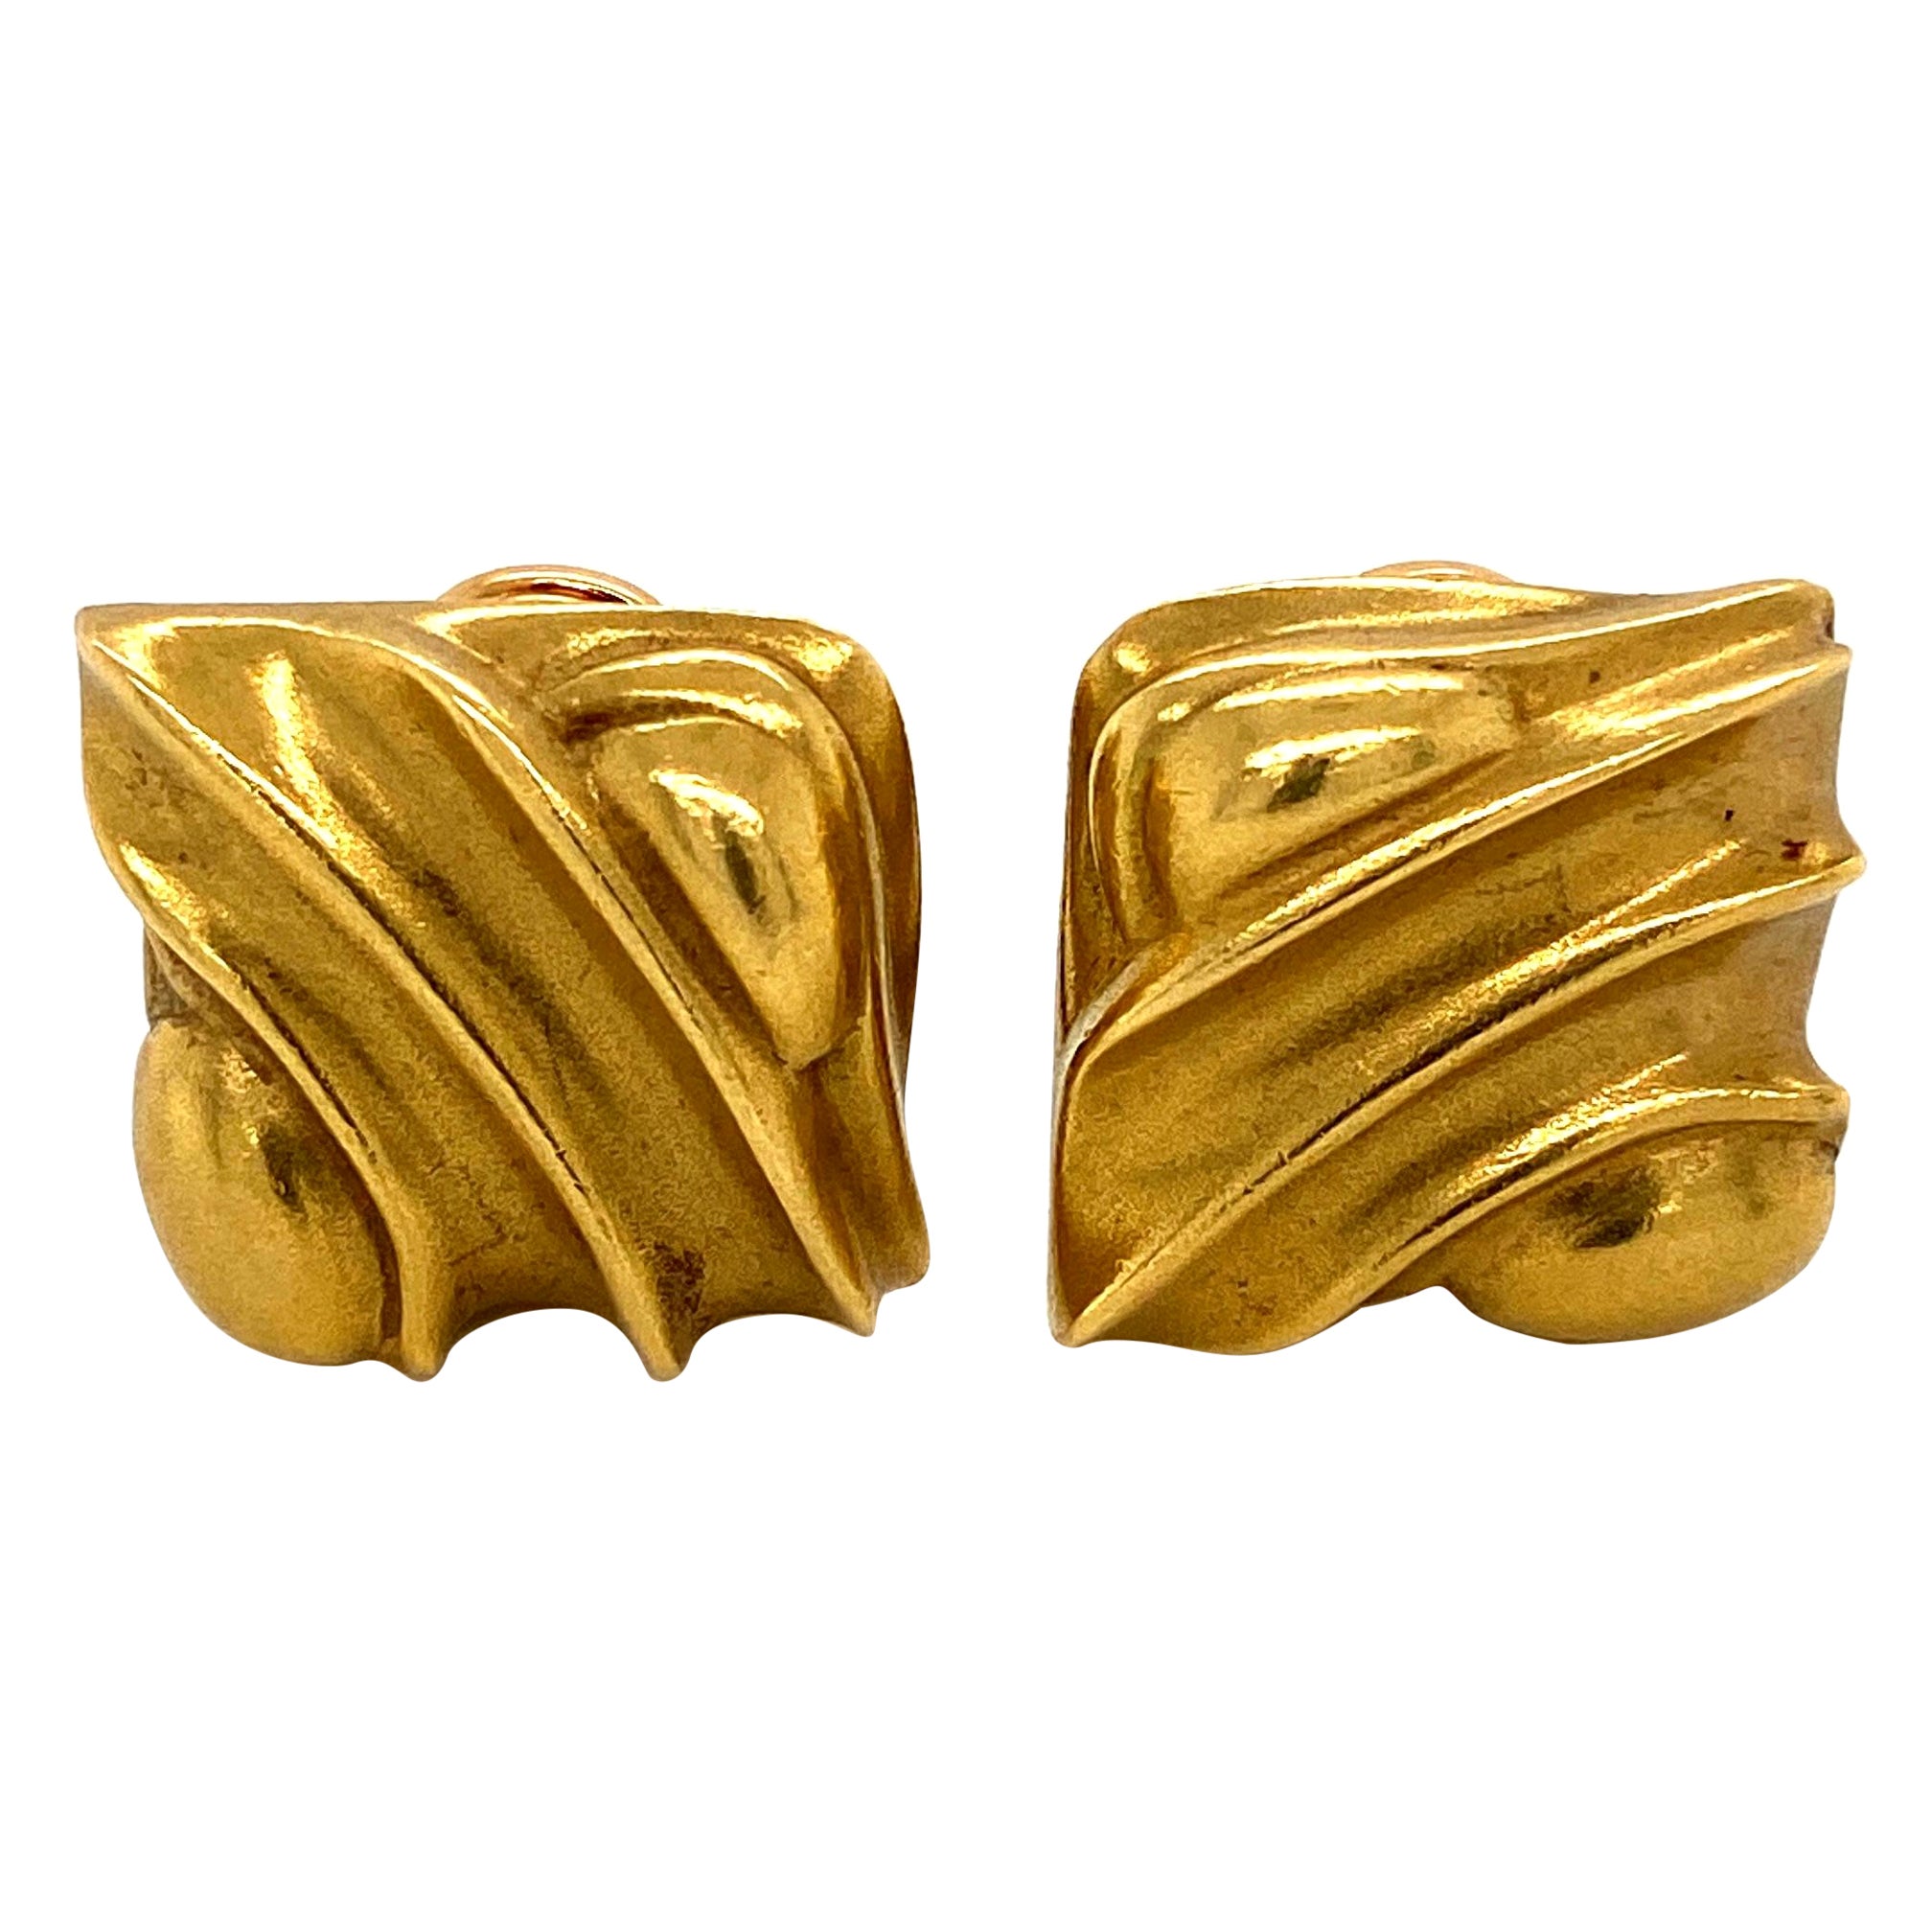 BARRY KIESELSTEIN CORD Signed Square Wave Designer Gold Clip-on Earrings